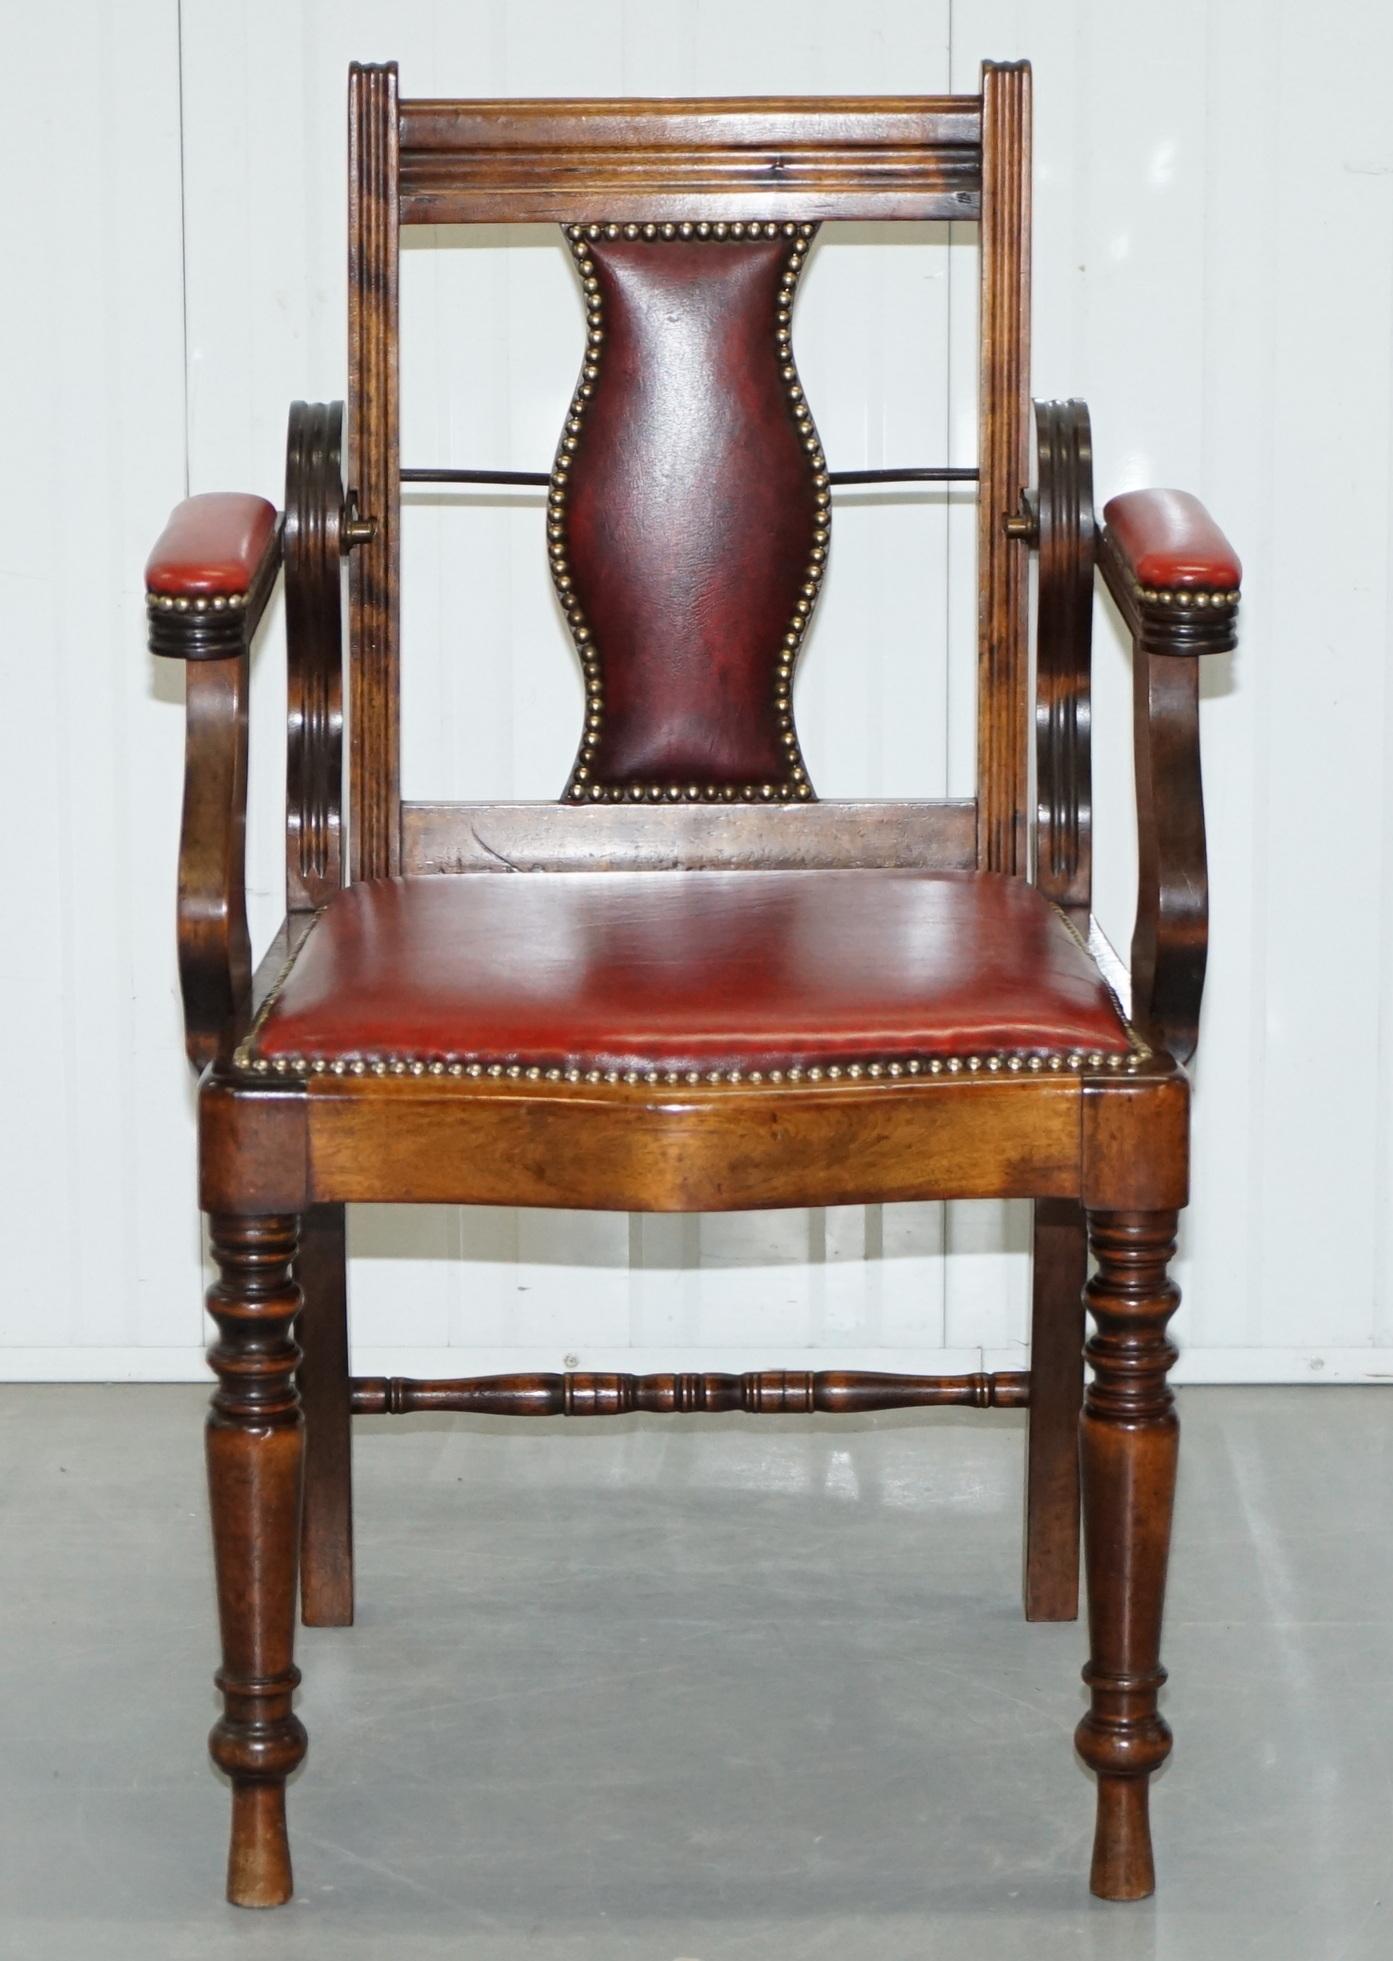 We are delighted to offer for sale this rare circa 850 English oak barbers chair with oxblood leather upholstery

A good looking and rare find, the back reclines using the original engraved and patented mechanism. The upholstery is in fine order